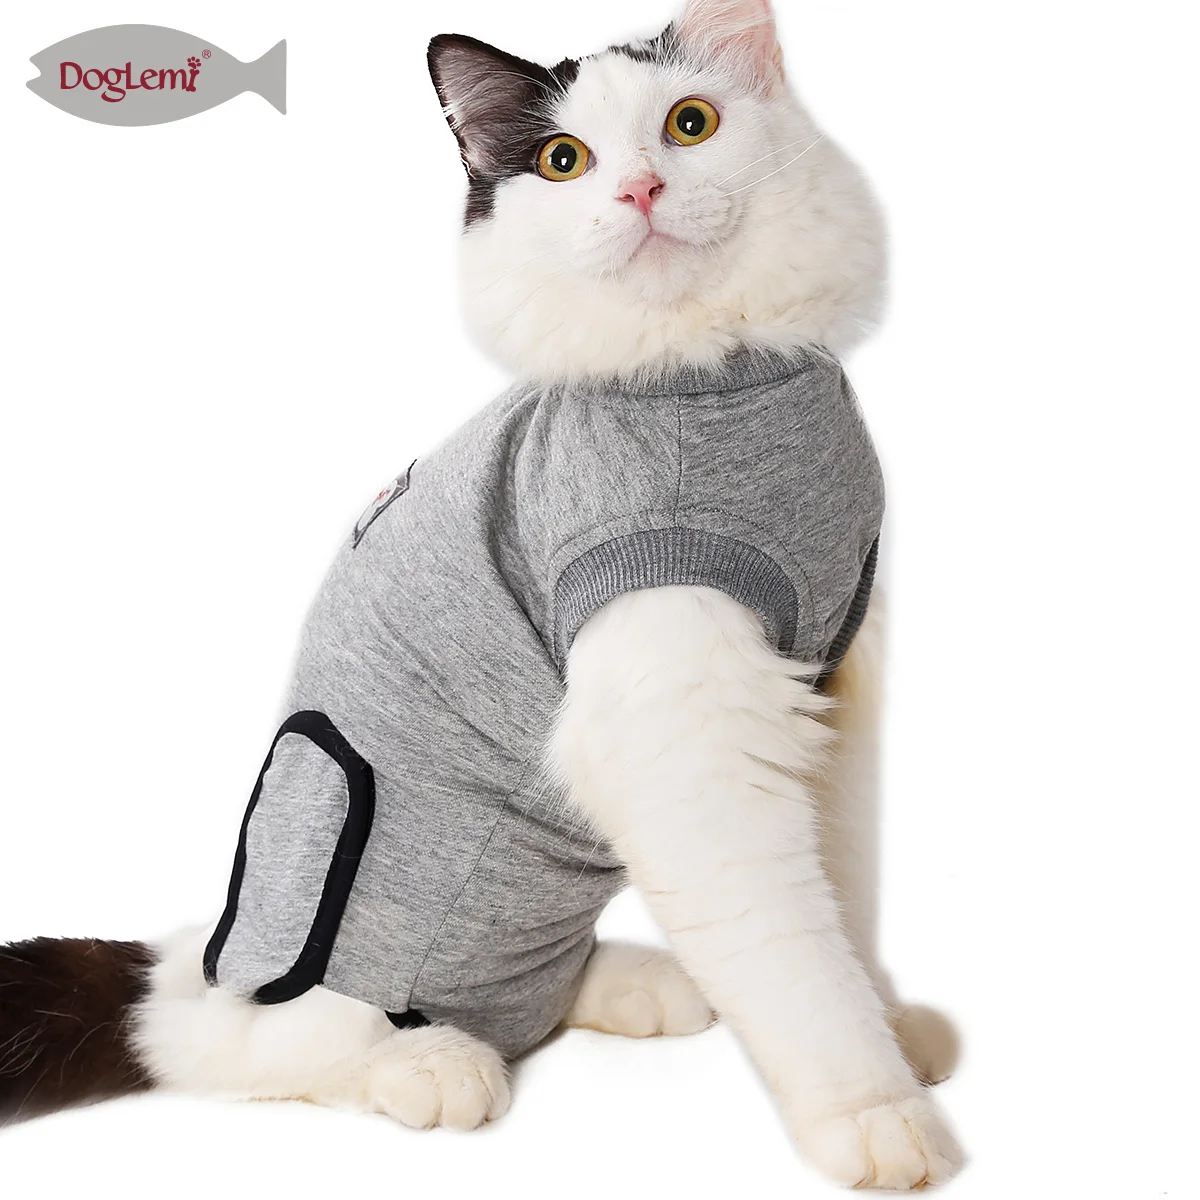 Glorisun Cat Recovery Suit Cat Breathable E-Collar Alternative After Surgery Wear Anti Licking Wounds 